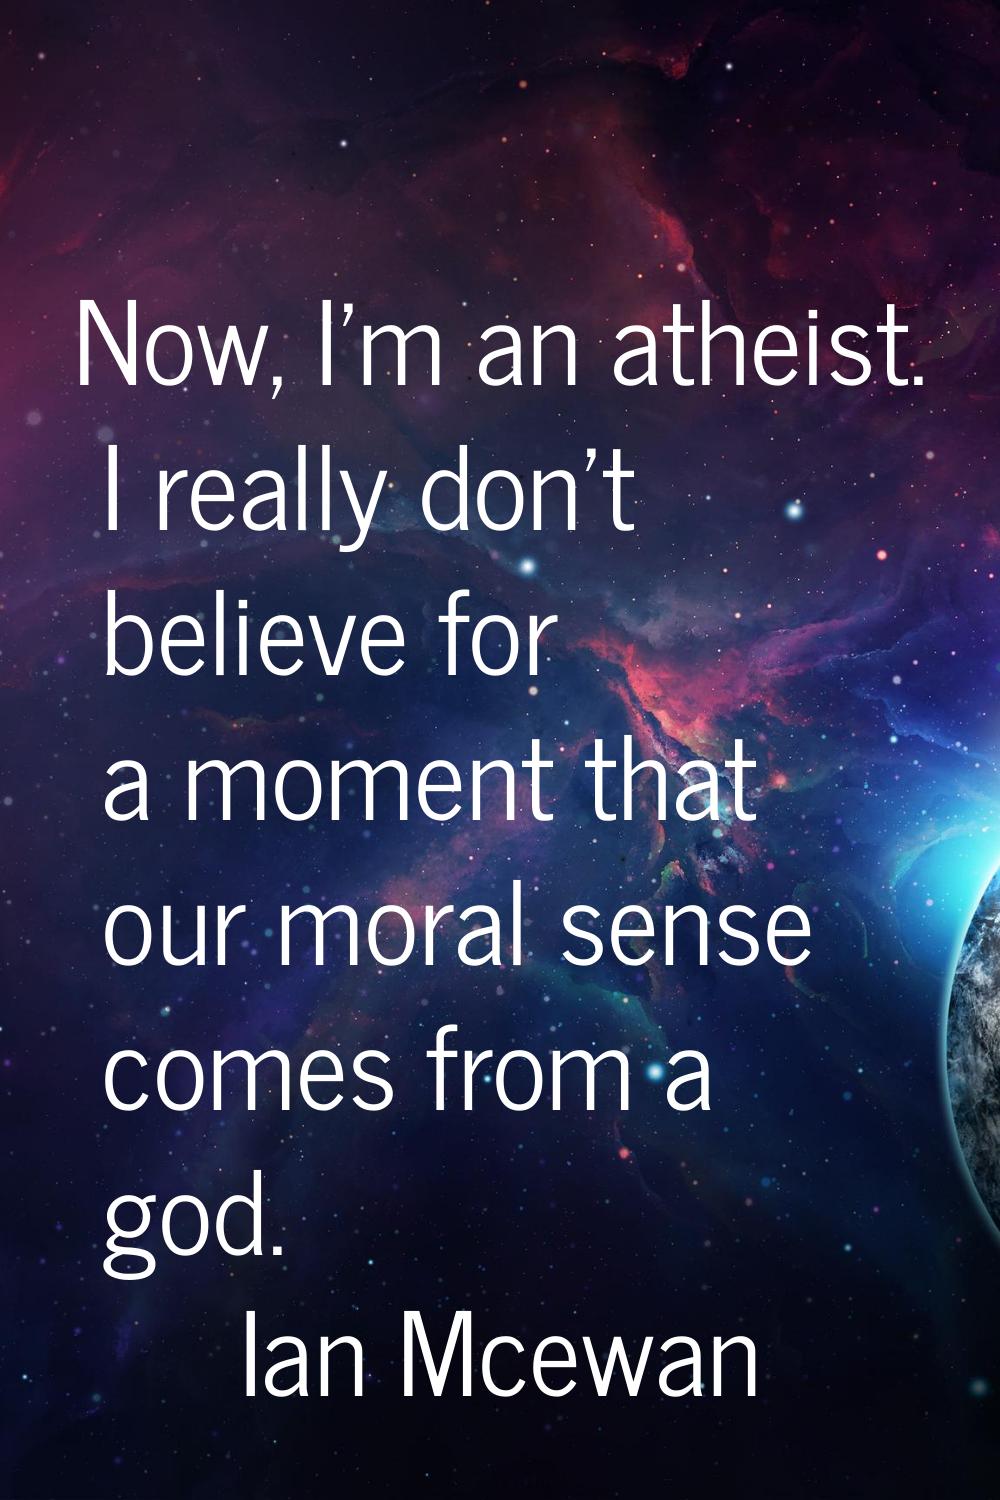 Now, I'm an atheist. I really don't believe for a moment that our moral sense comes from a god.